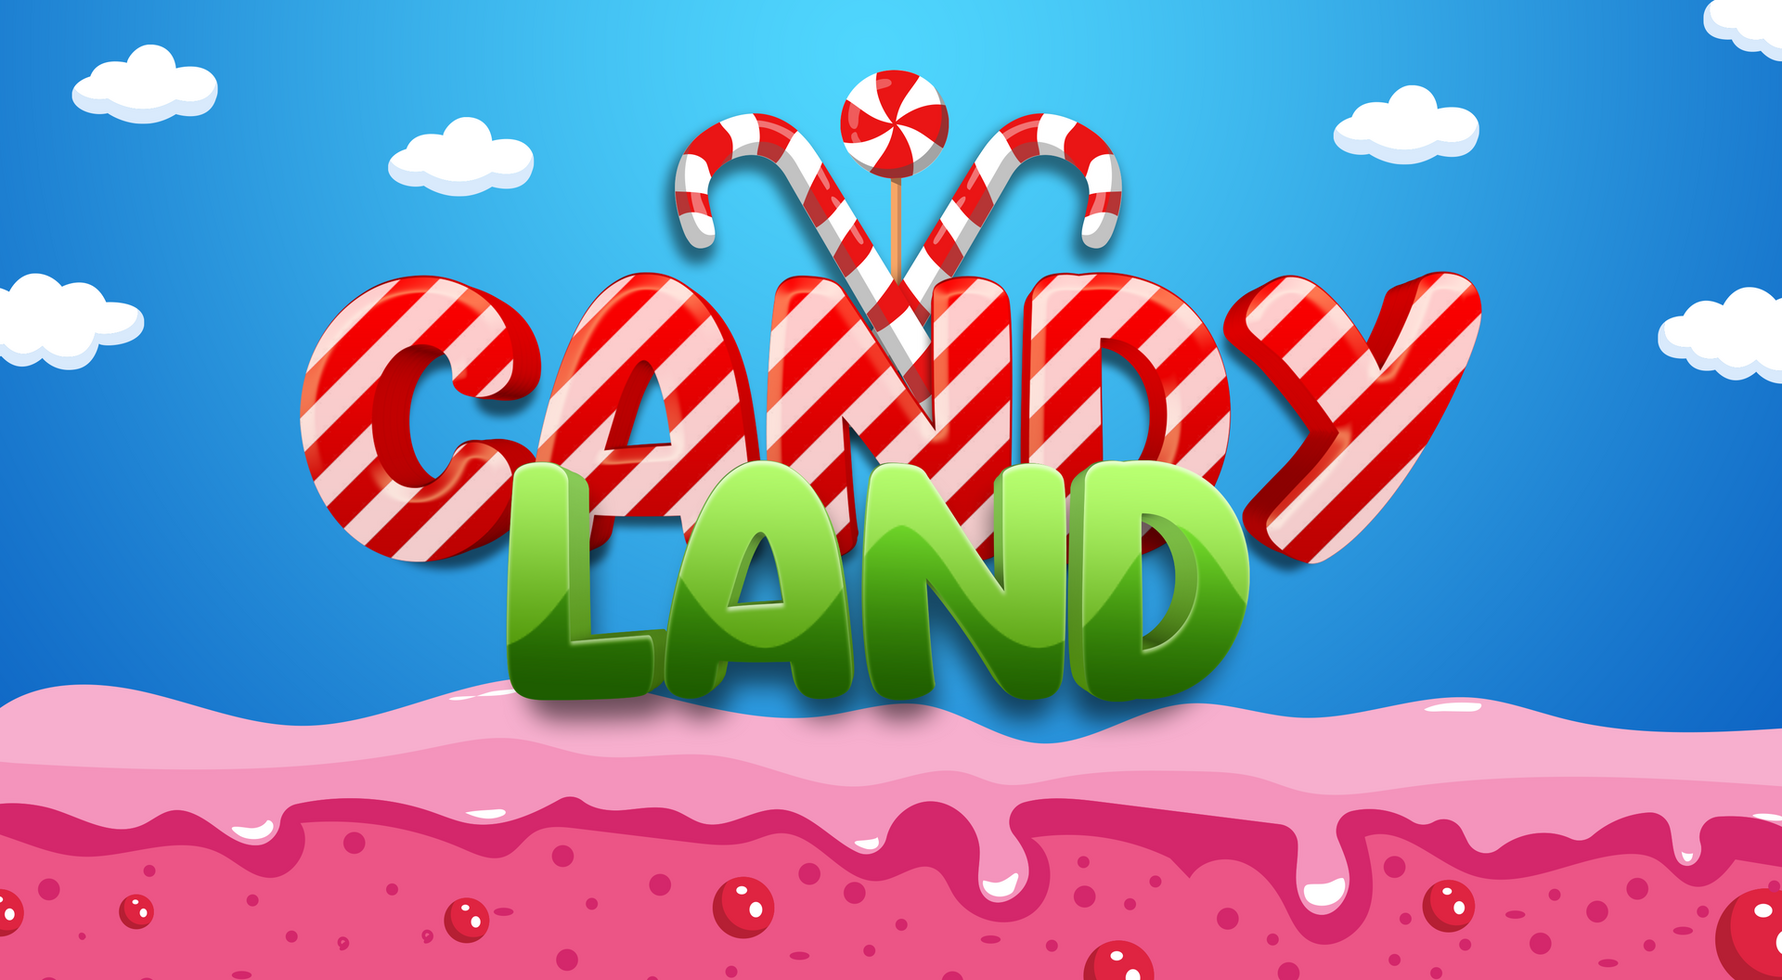 candy land text effect background template psd